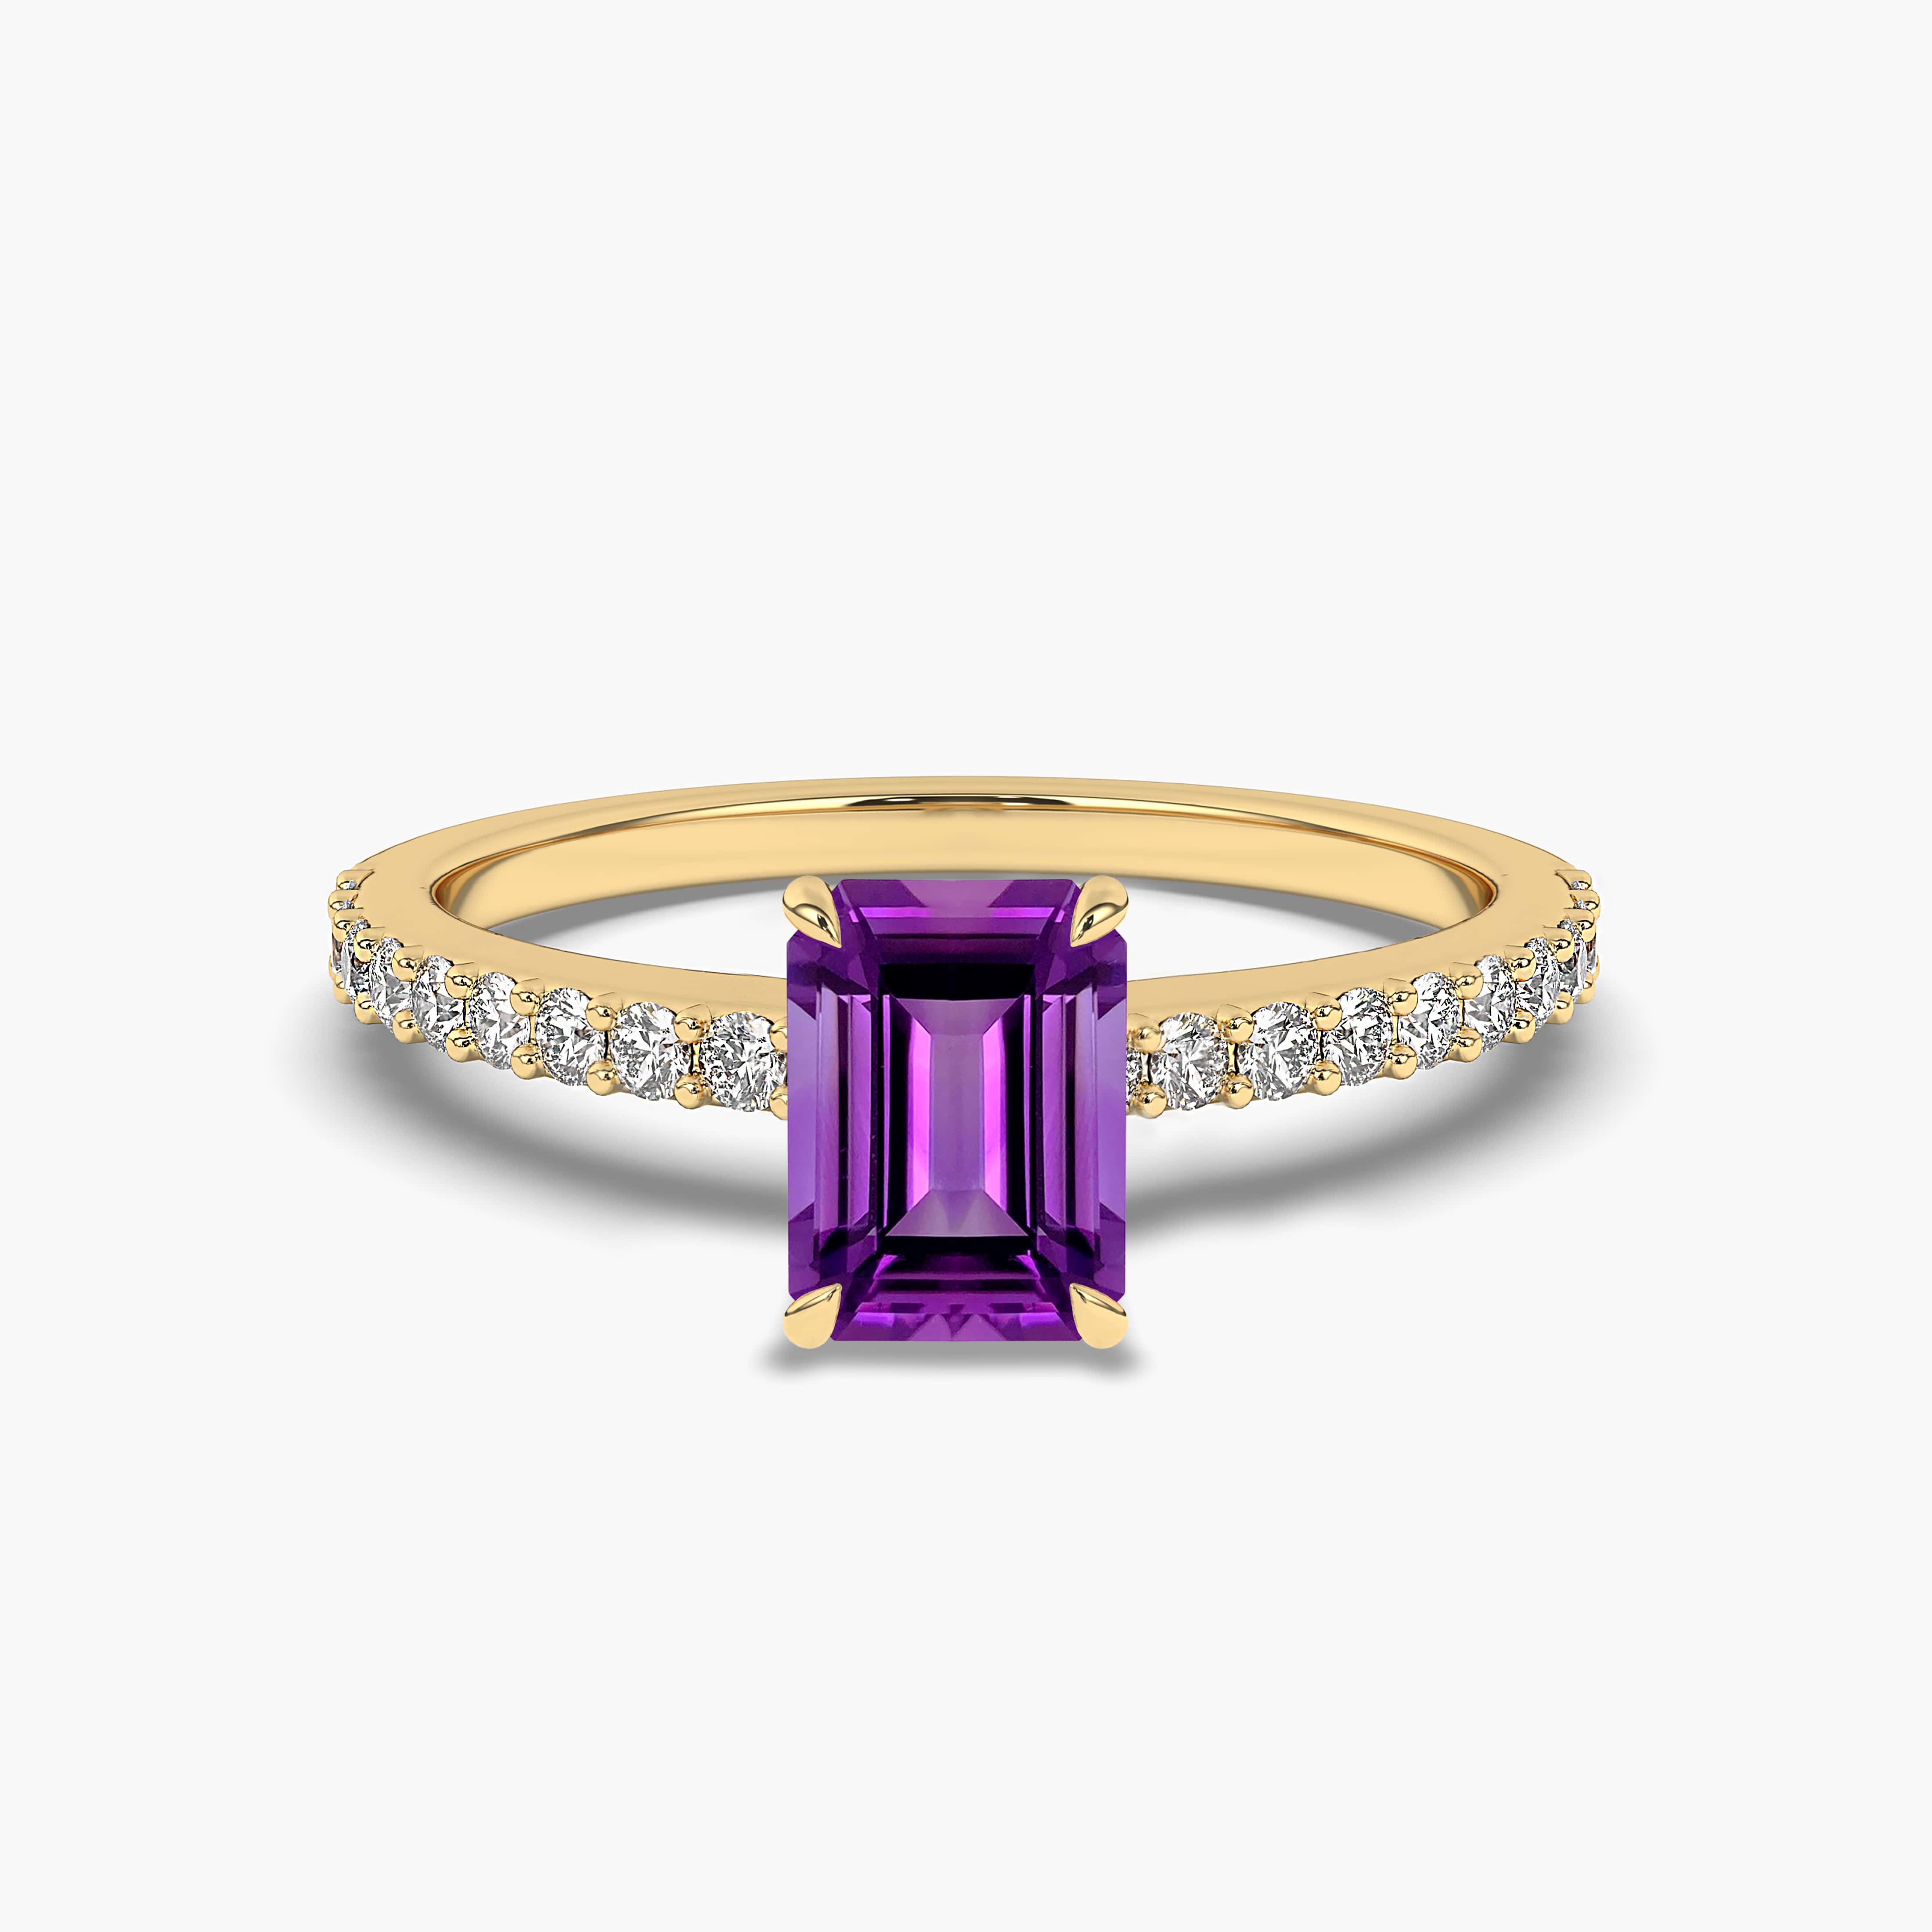 Emerald Cut Amethyst and Diamond Ring in yellow gold